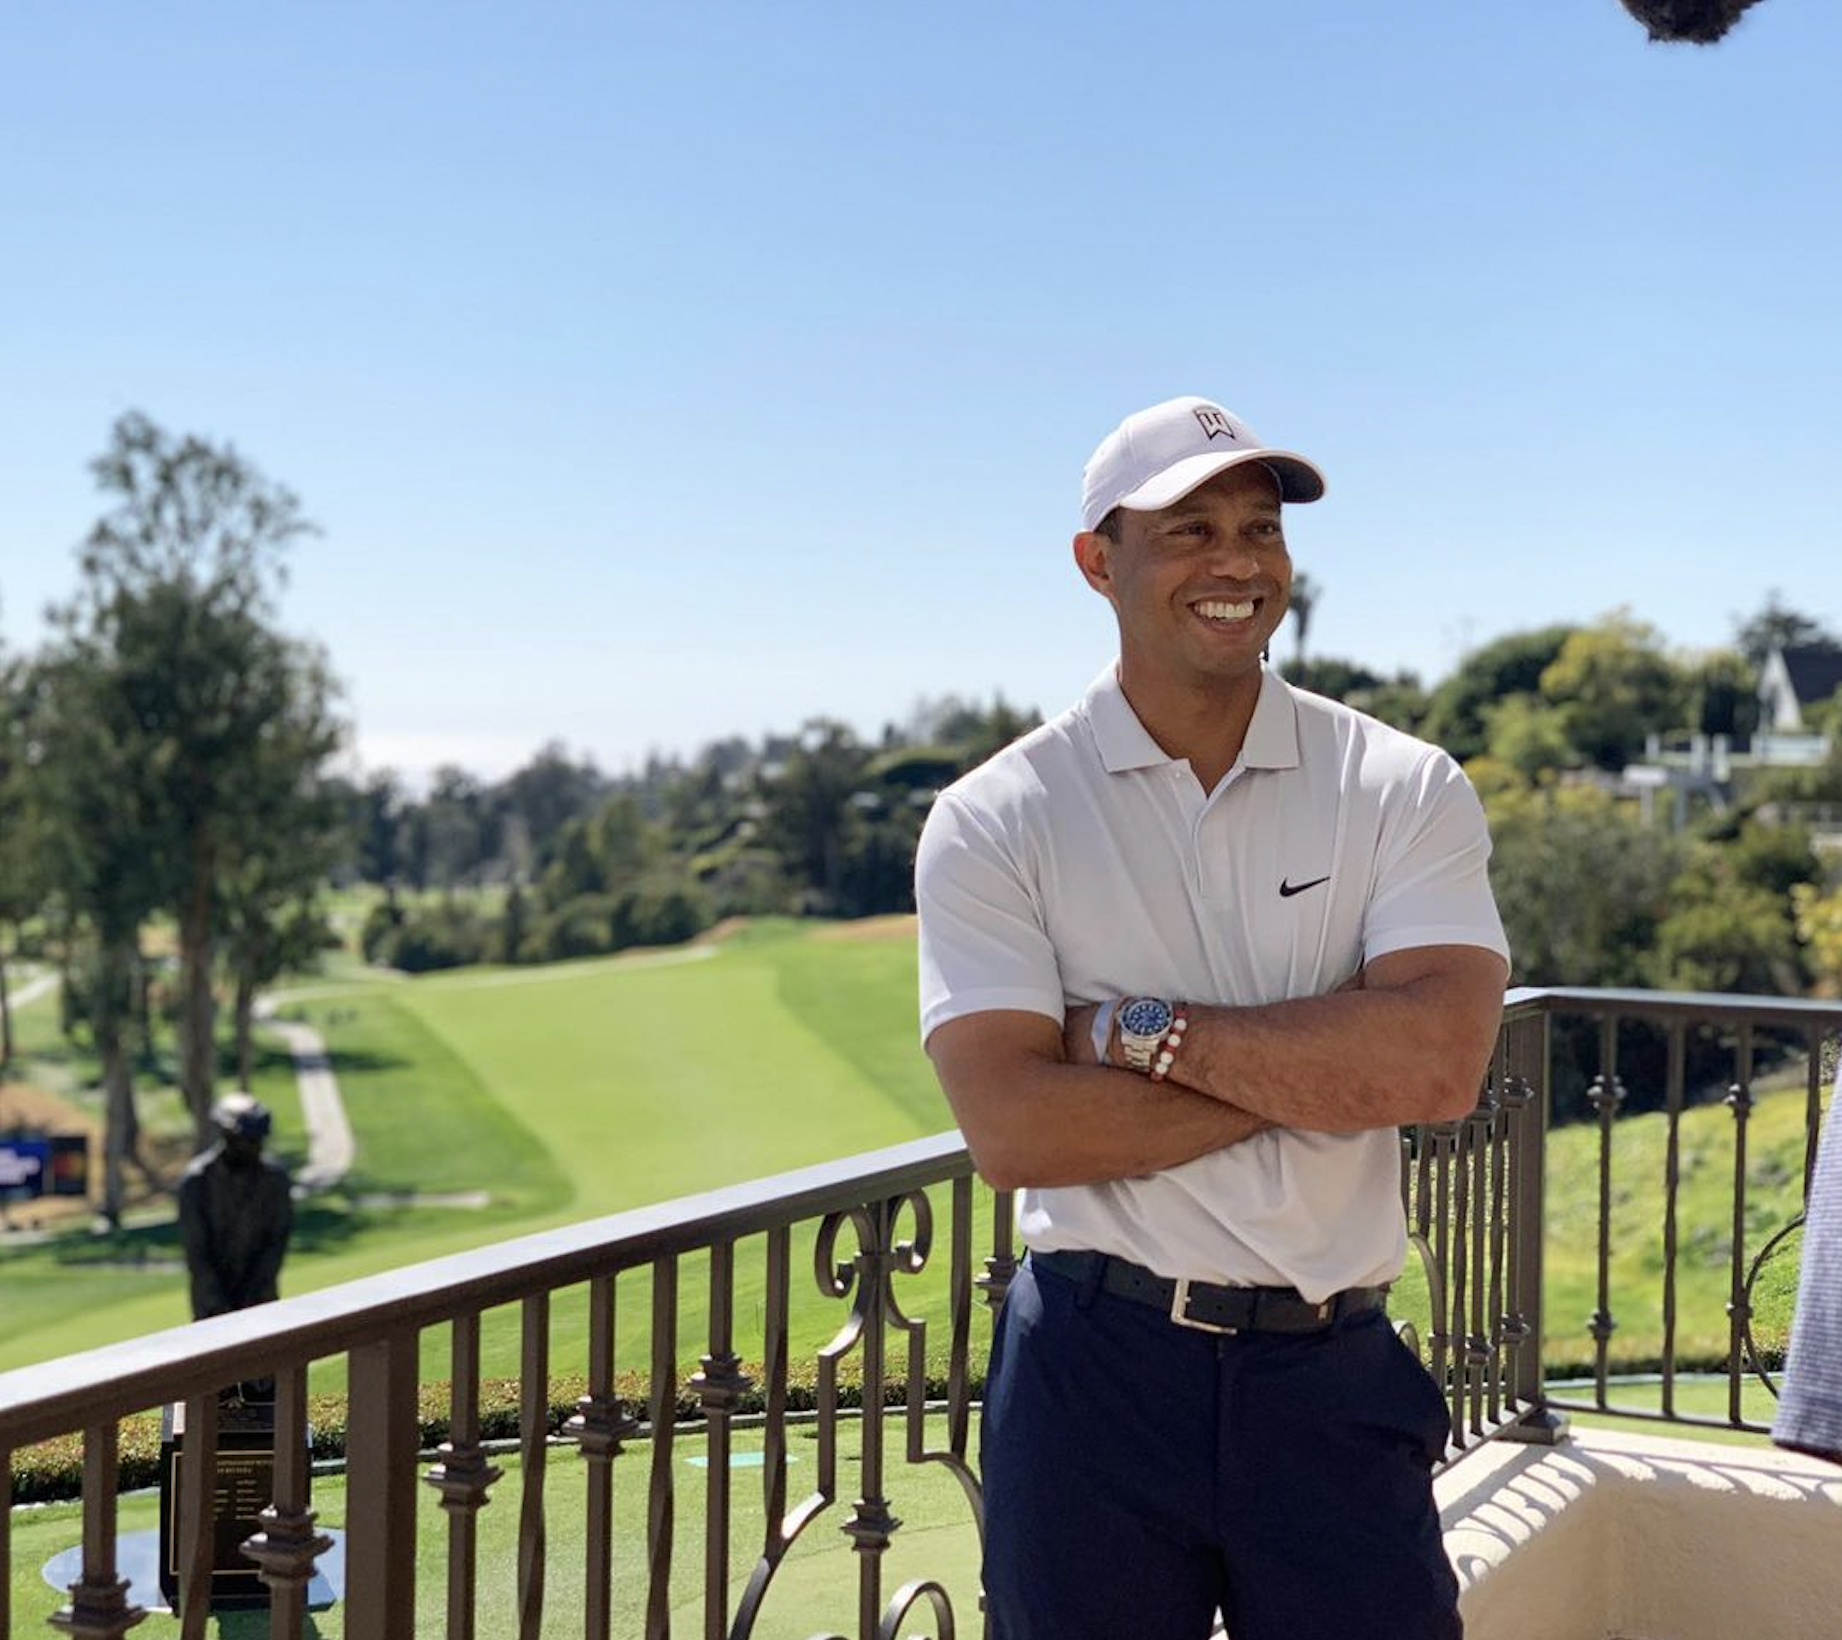 Golf pro Tiger Woods recently suffered a serious car crash in California, US, but fans are already hoping he can make a comeback to the sport. Photo: @tigerwoods/Instagram